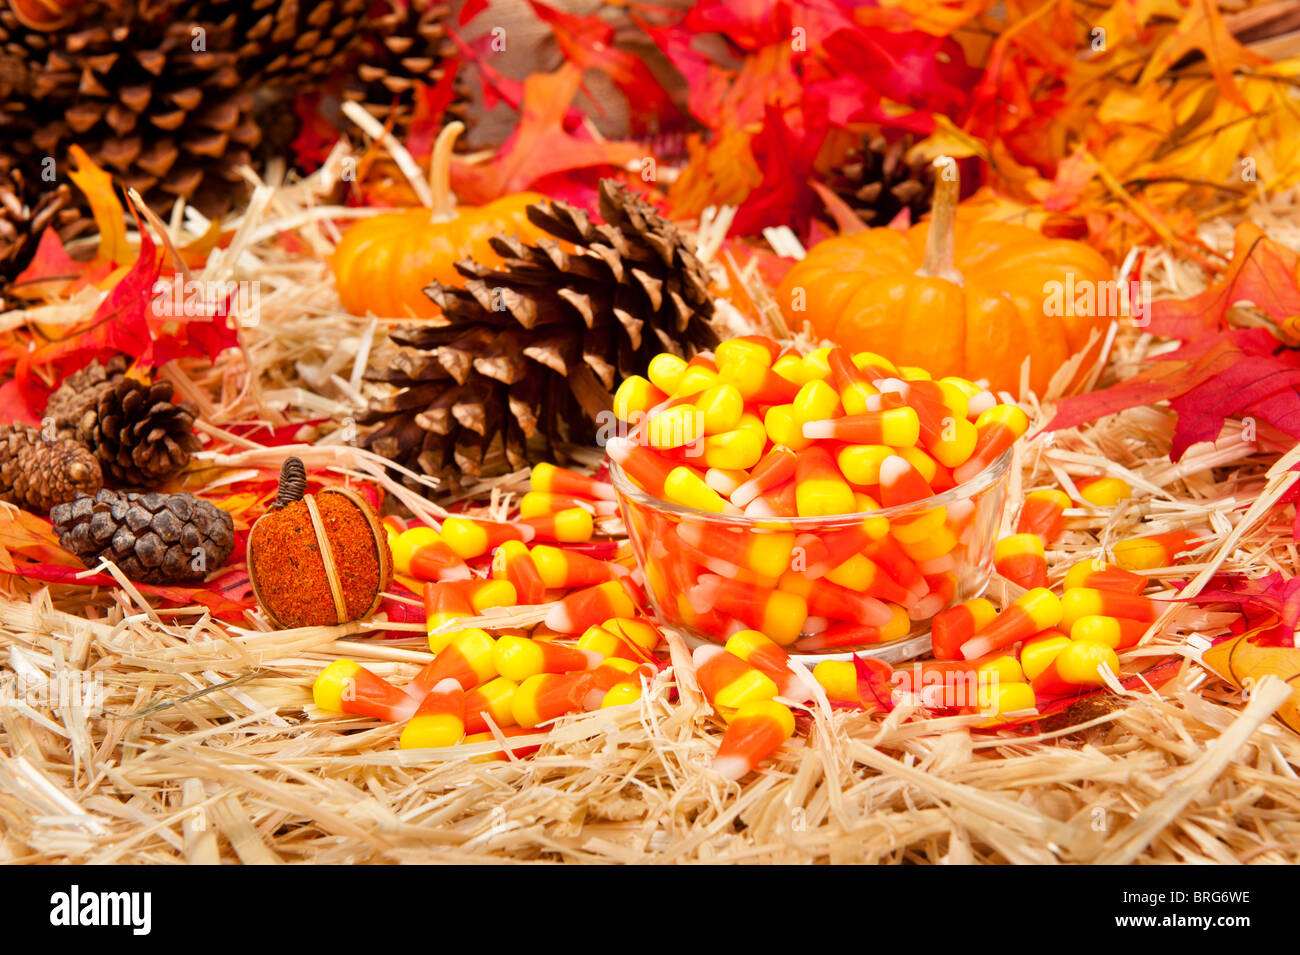 An Autumn holiday theme with pumpkins, corn, pine cones, autumn leaves and candy on a hay base with focus on the candy. Stock Photo